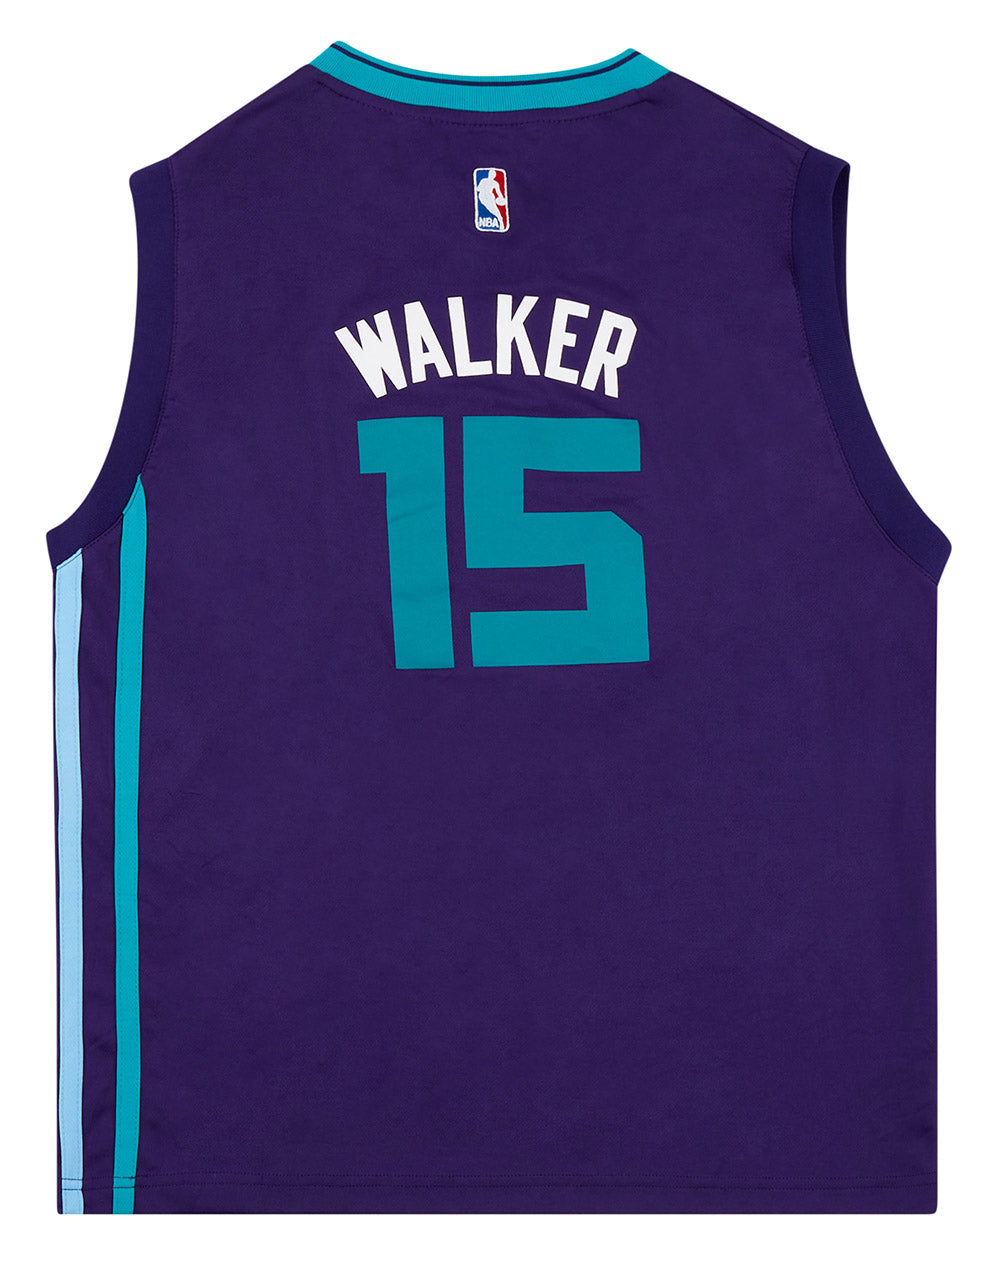 nba jersey charlotte hornets - Buy nba jersey charlotte hornets at Best  Price in Malaysia